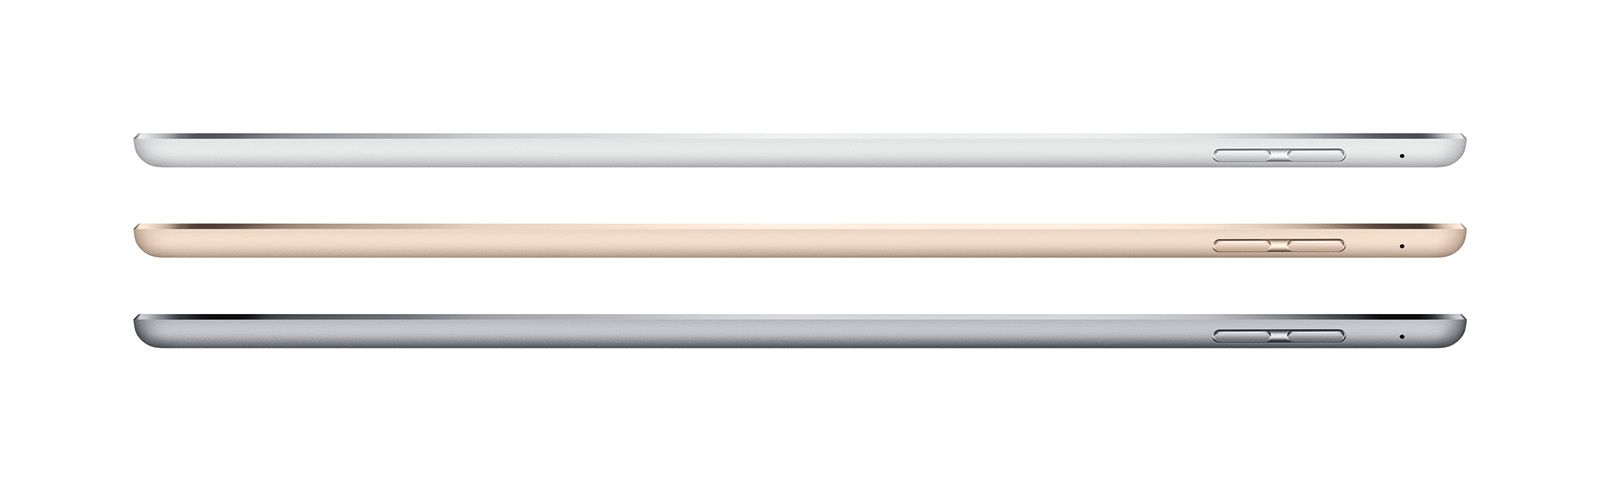 ipad air 2 unveiled thinner than ever and with an a8x processor image 2